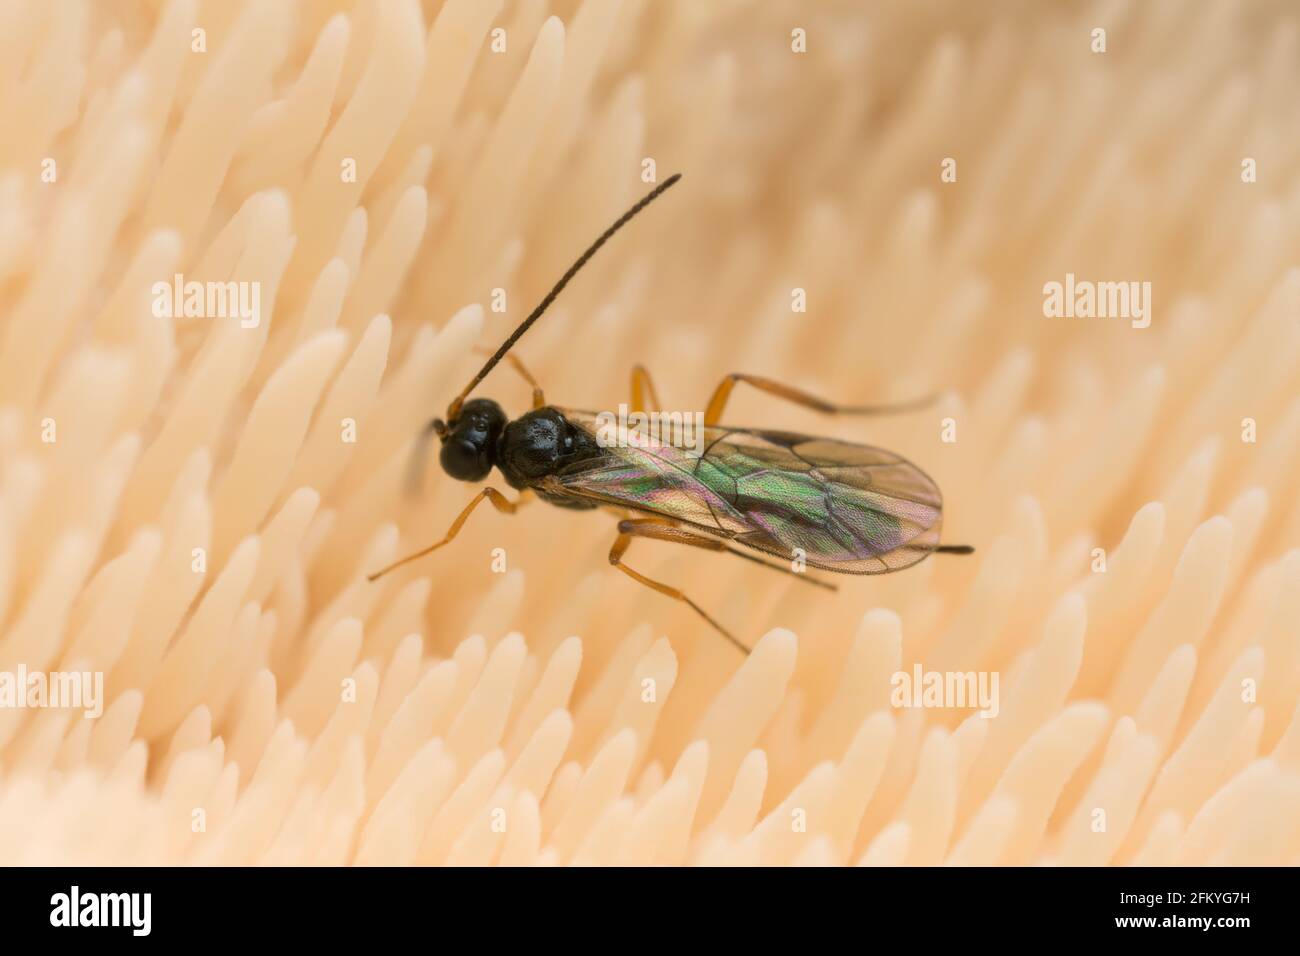 Parasite wasp on mushroom photographed with high magnification Stock Photo